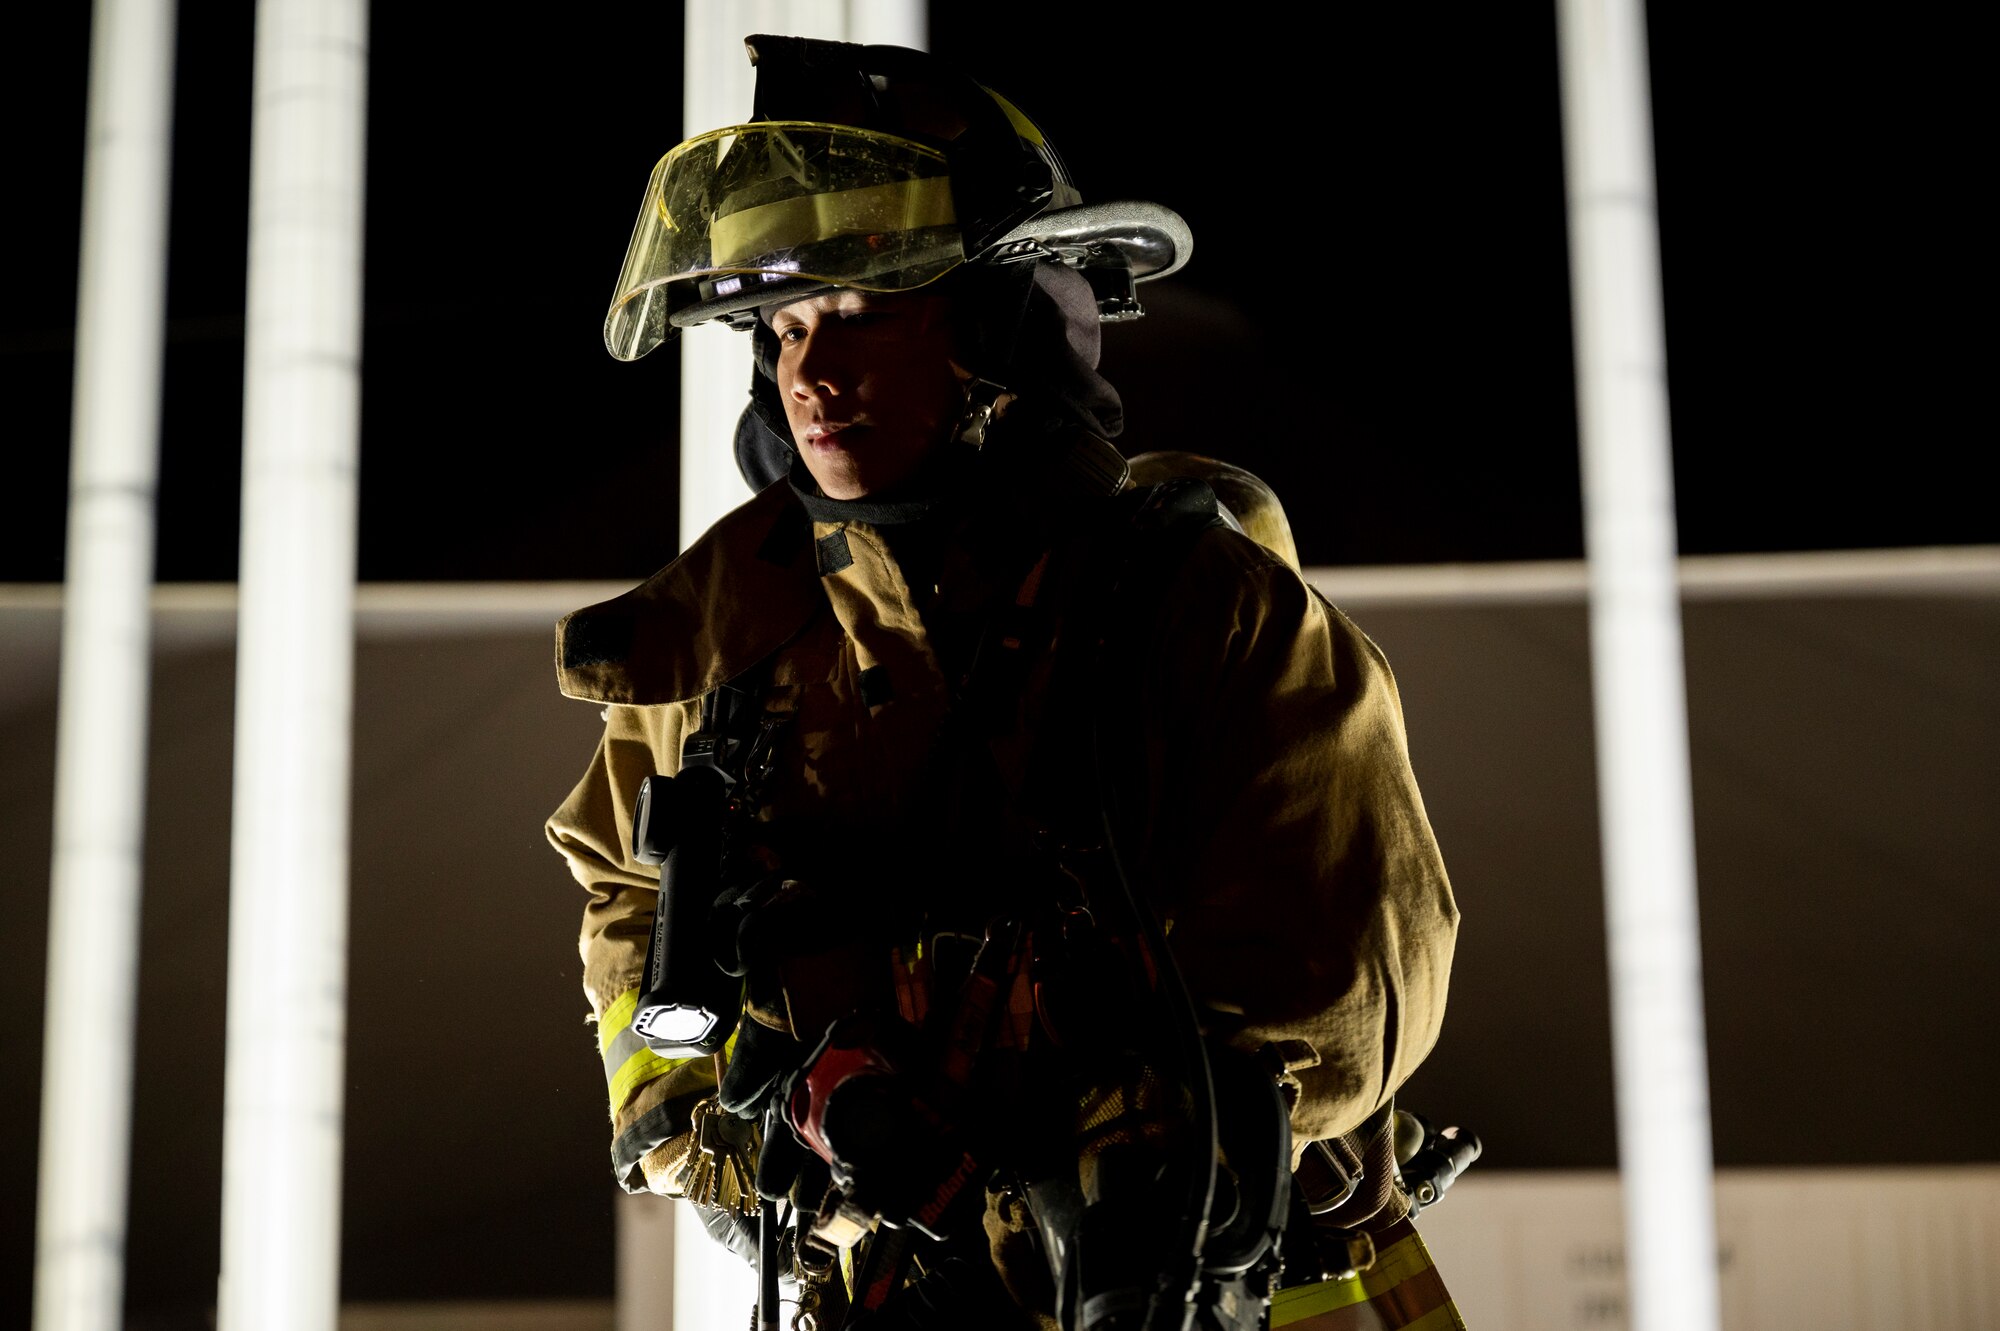 Photo of a U.S. Air Force firefighter during the dark.